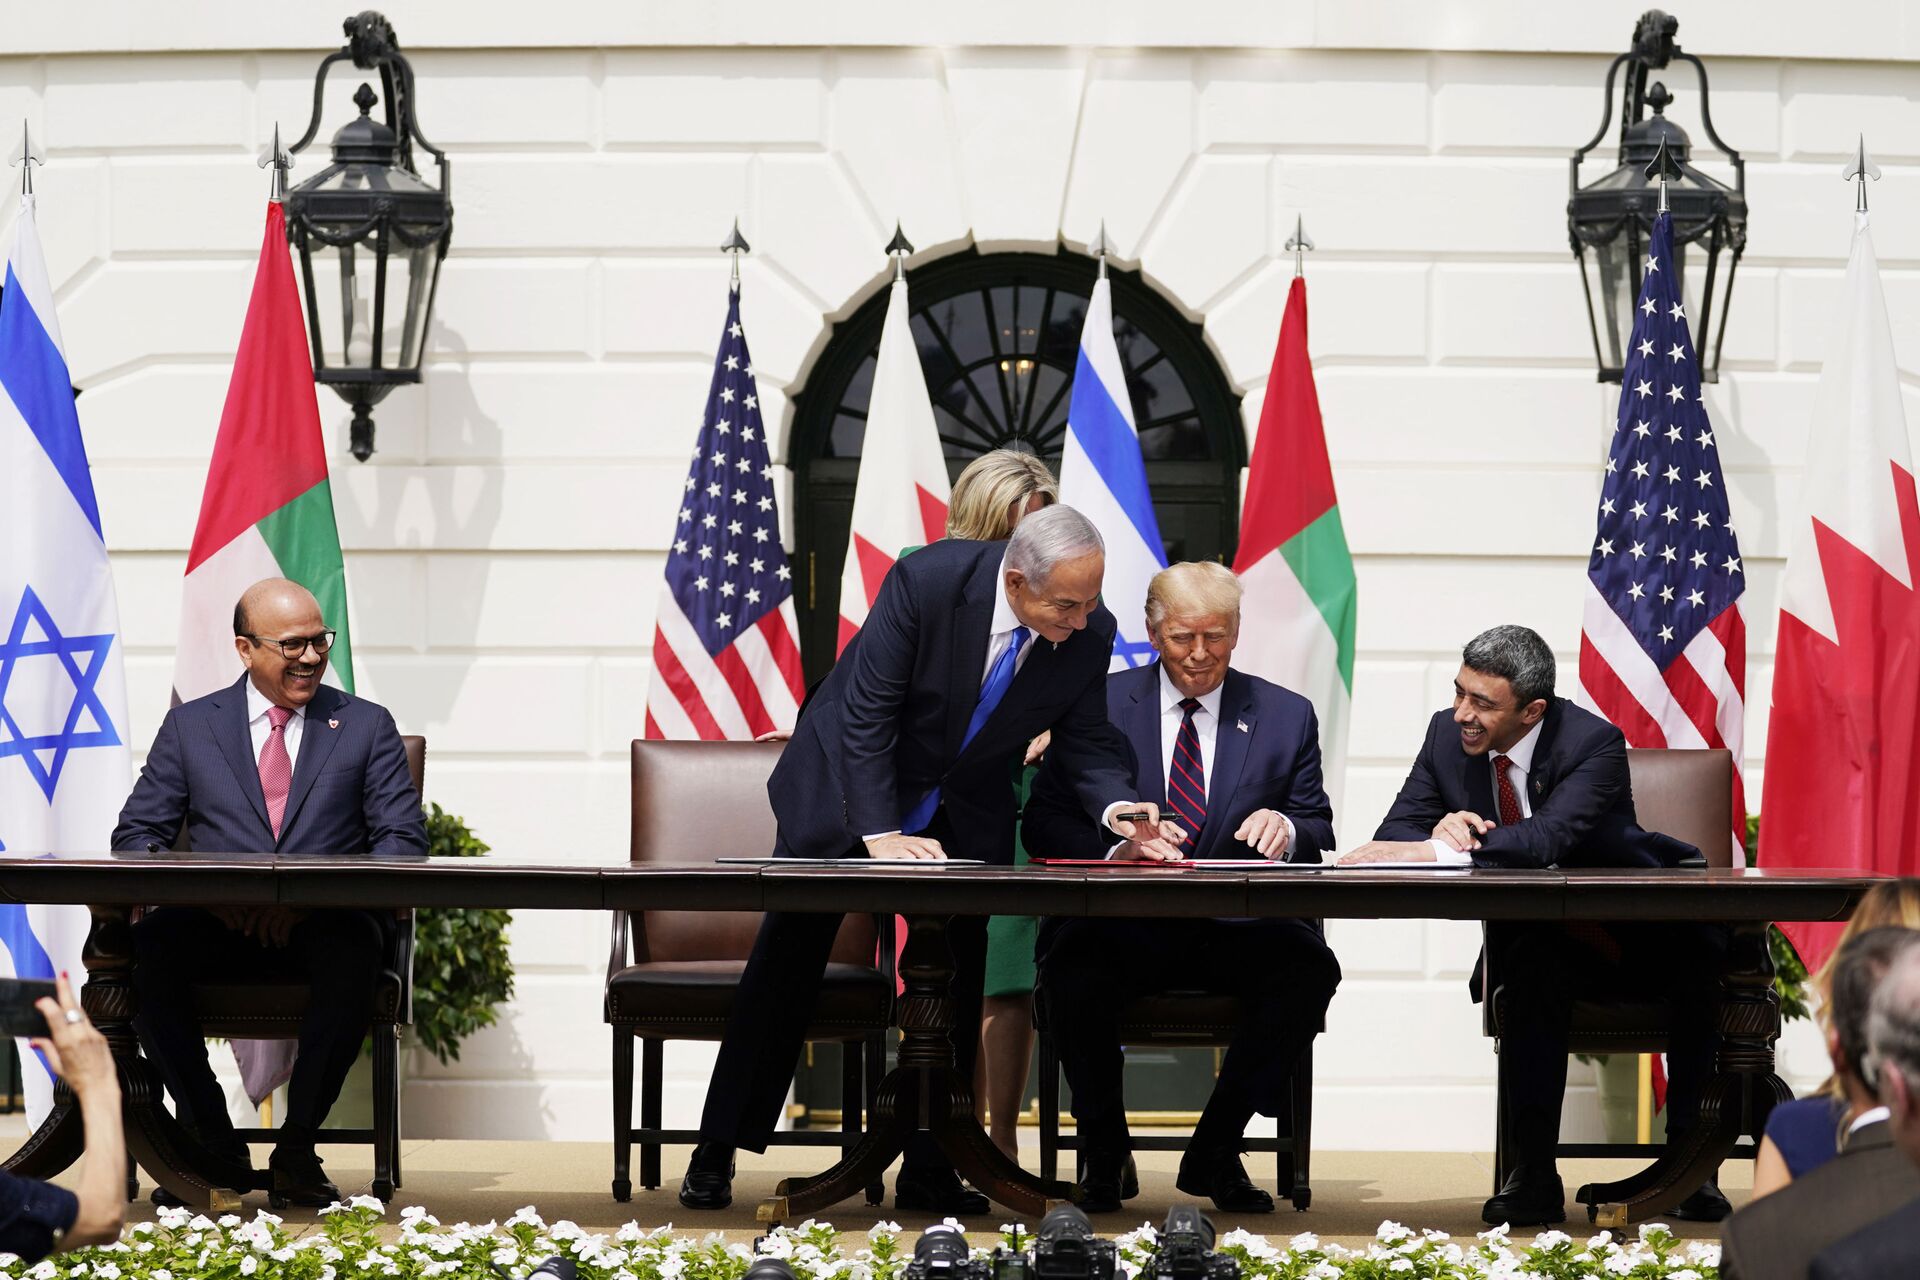 President Donald Trump, center, with from left, Bahrain Foreign Minister Khalid bin Ahmed Al Khalifa, Israeli Prime Minister Benjamin Netanyahu, Trump, and United Arab Emirates Foreign Minister Abdullah bin Zayed al-Nahyan, during the Abraham Accords signing ceremony on the South Lawn of the White House, Tuesday, Sept. 15, 2020, in Washington. (AP Photo/Alex Brandon) - Sputnik International, 1920, 12.12.2021